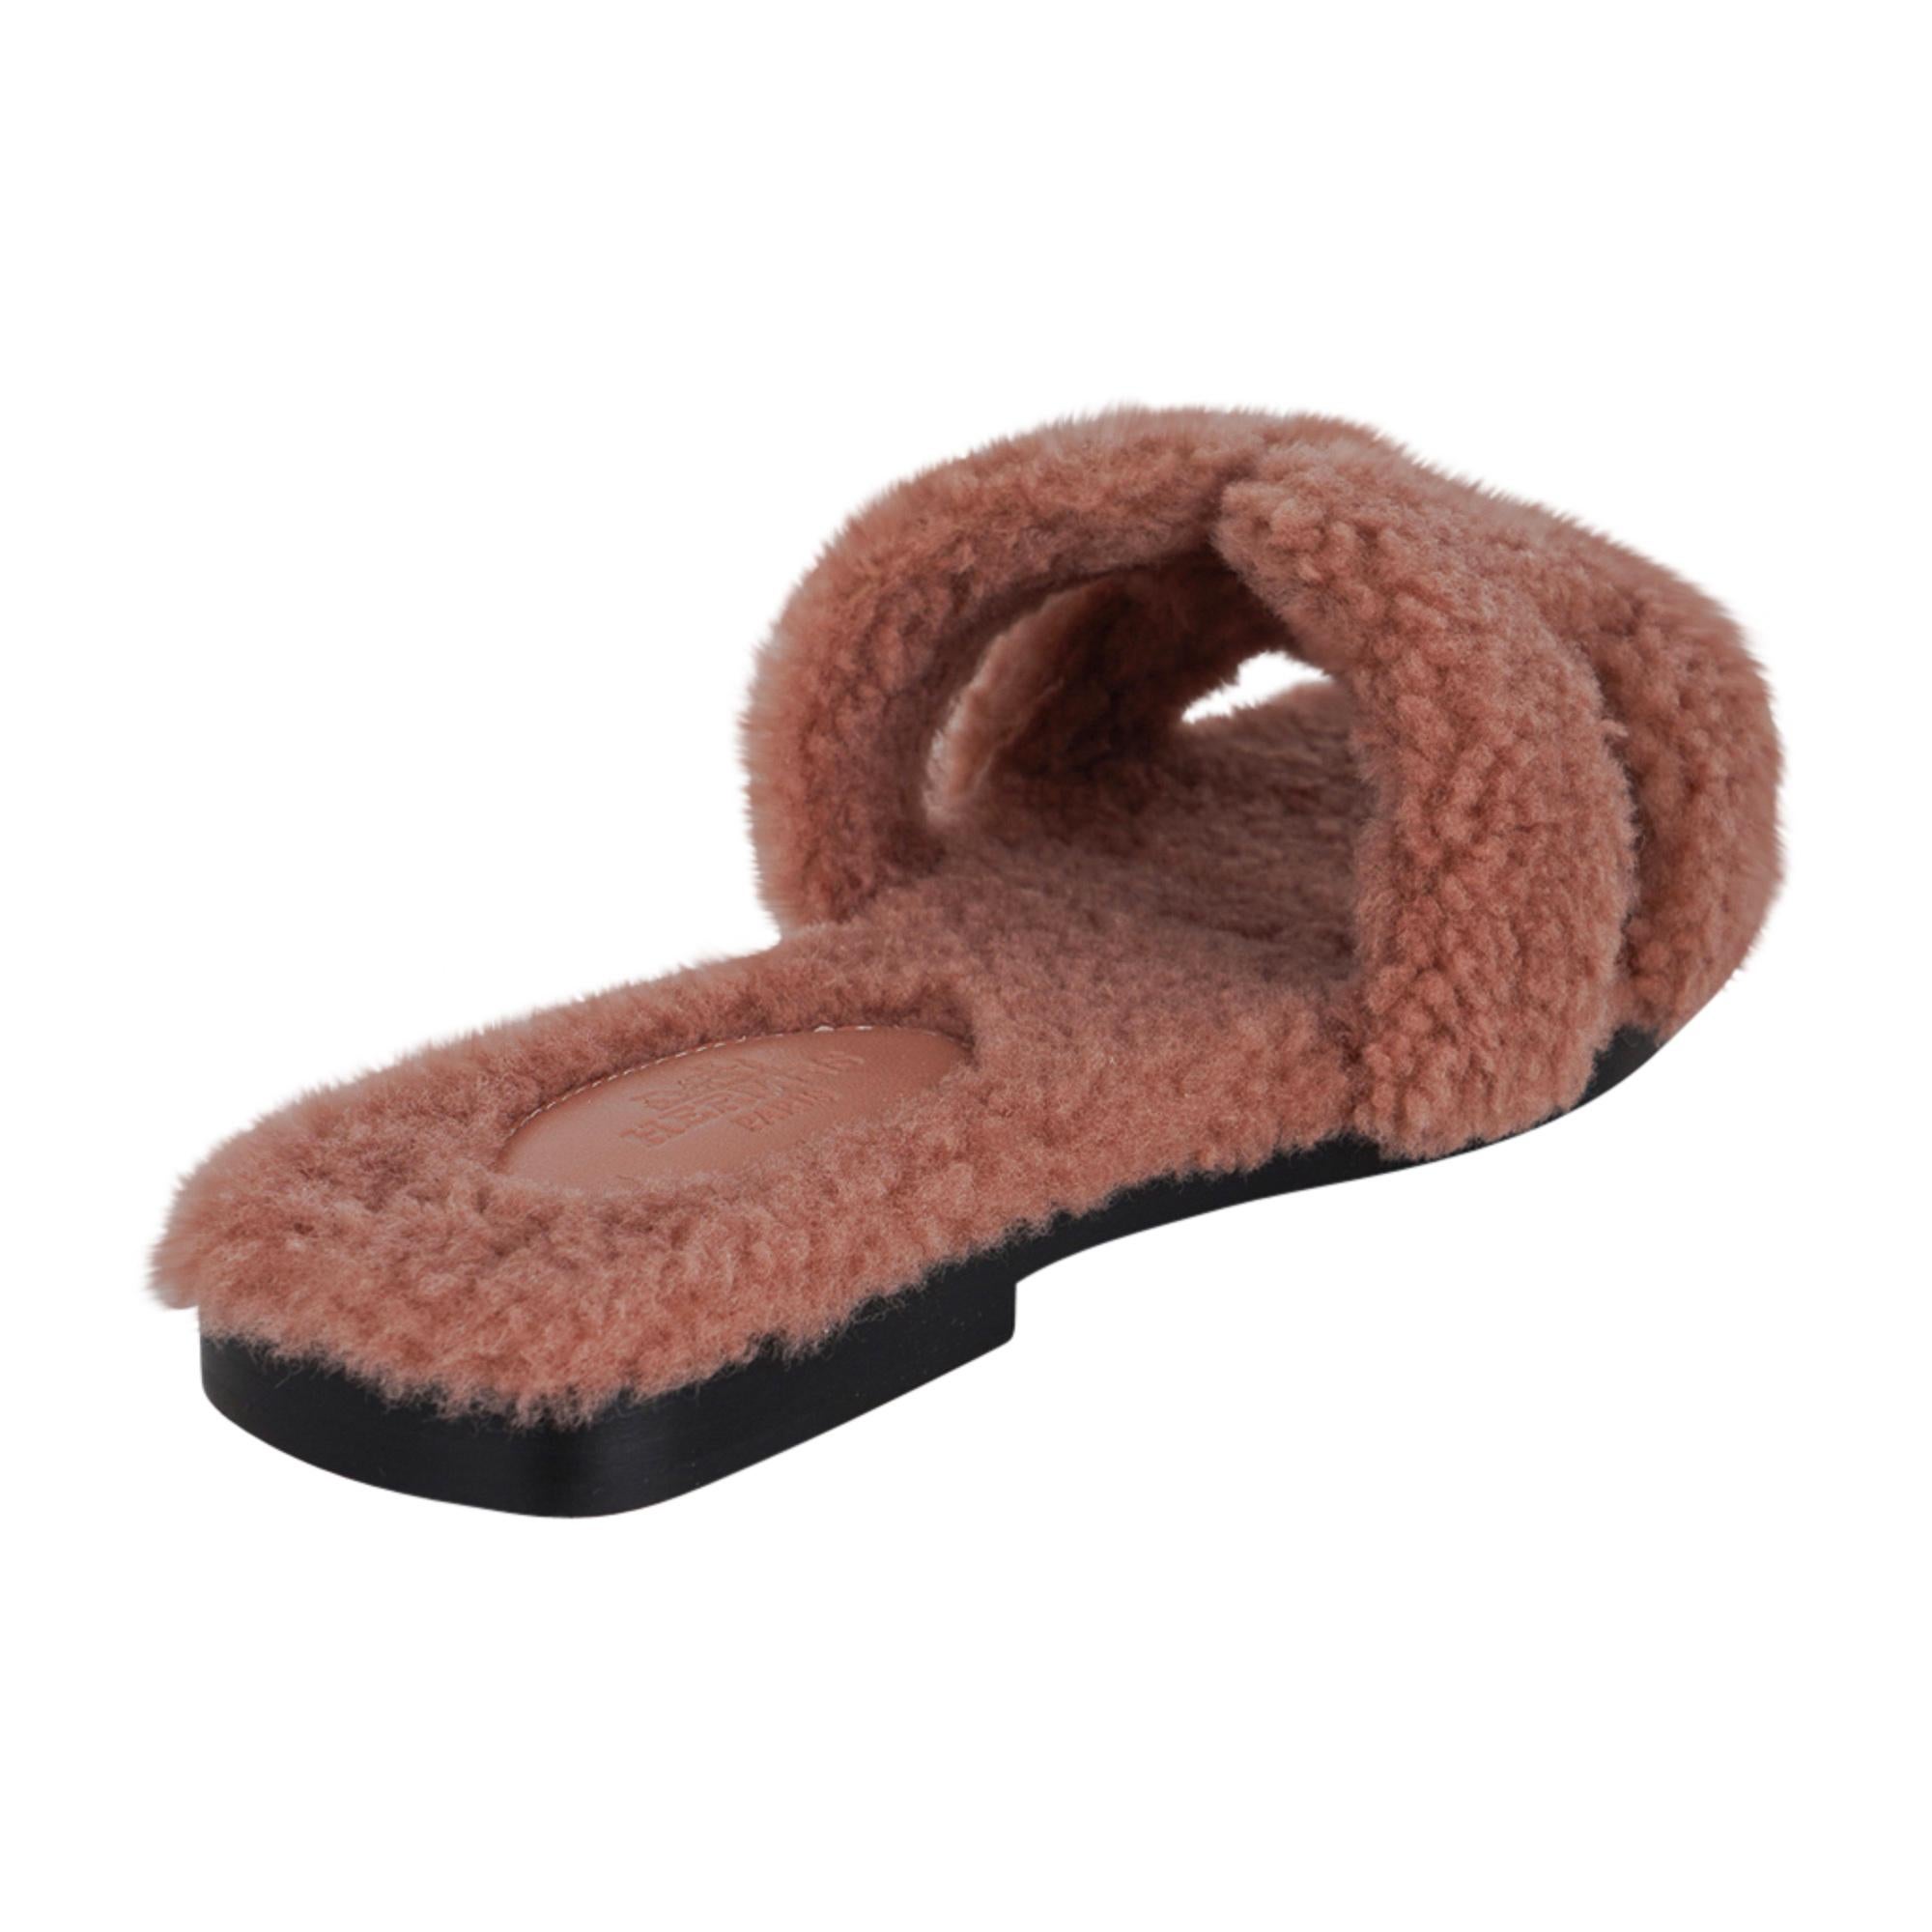 Brown Hermes Teddy Bear Oran Rose Aube Shearling Sandal Limited Edition 34.5 / 4.5 5 For Sale